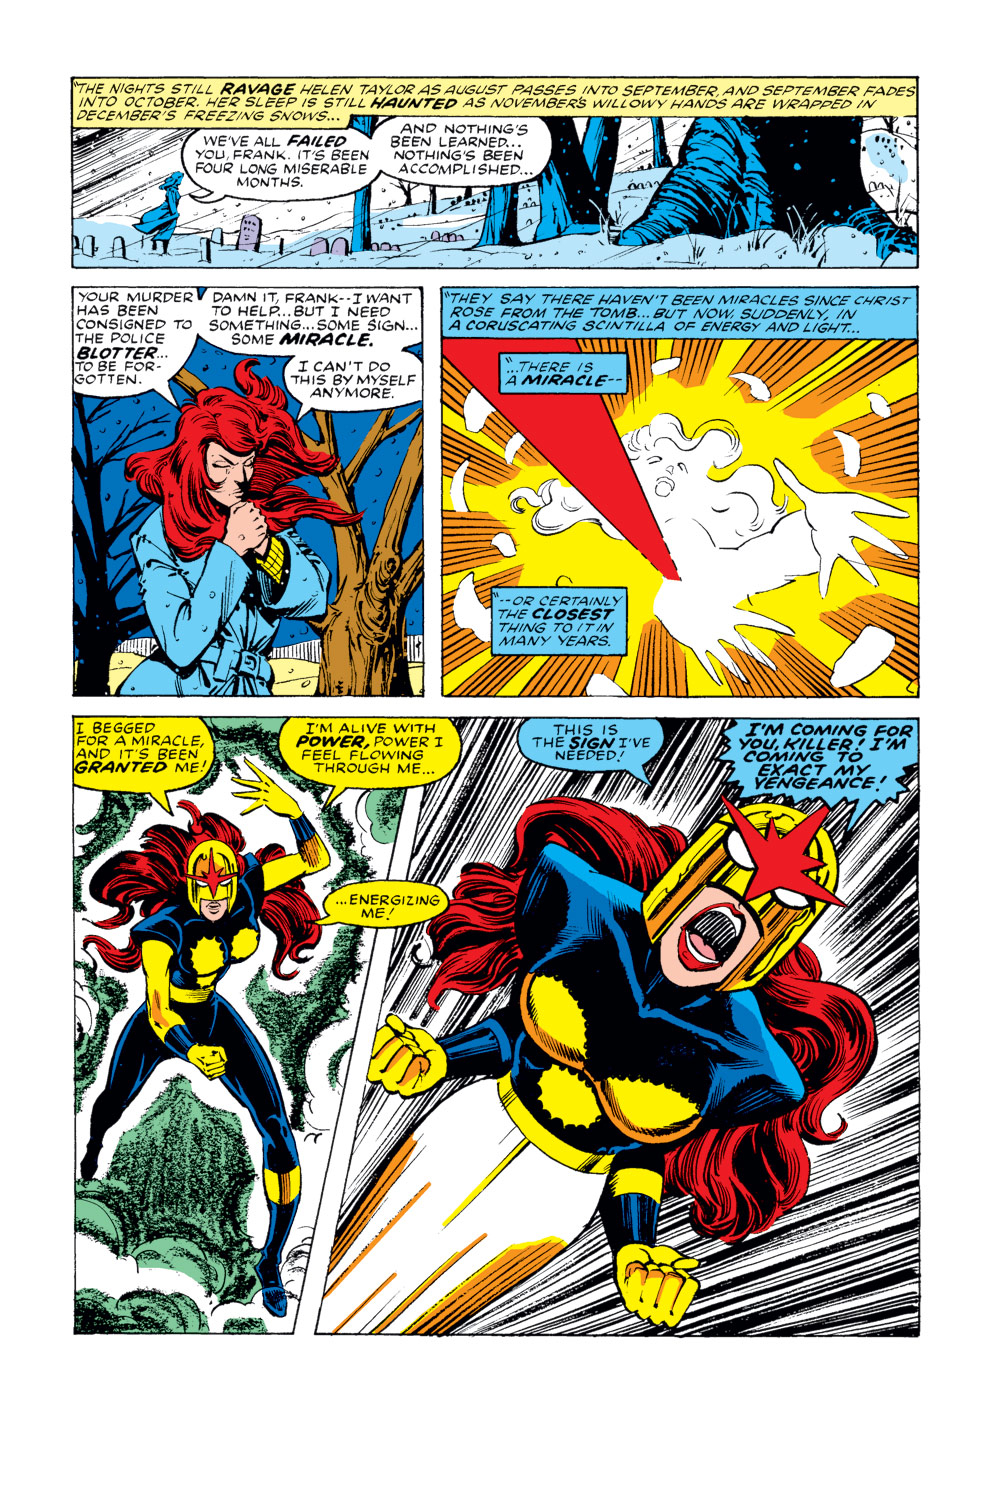 What If? (1977) issue 15 - Nova had been four other people - Page 6